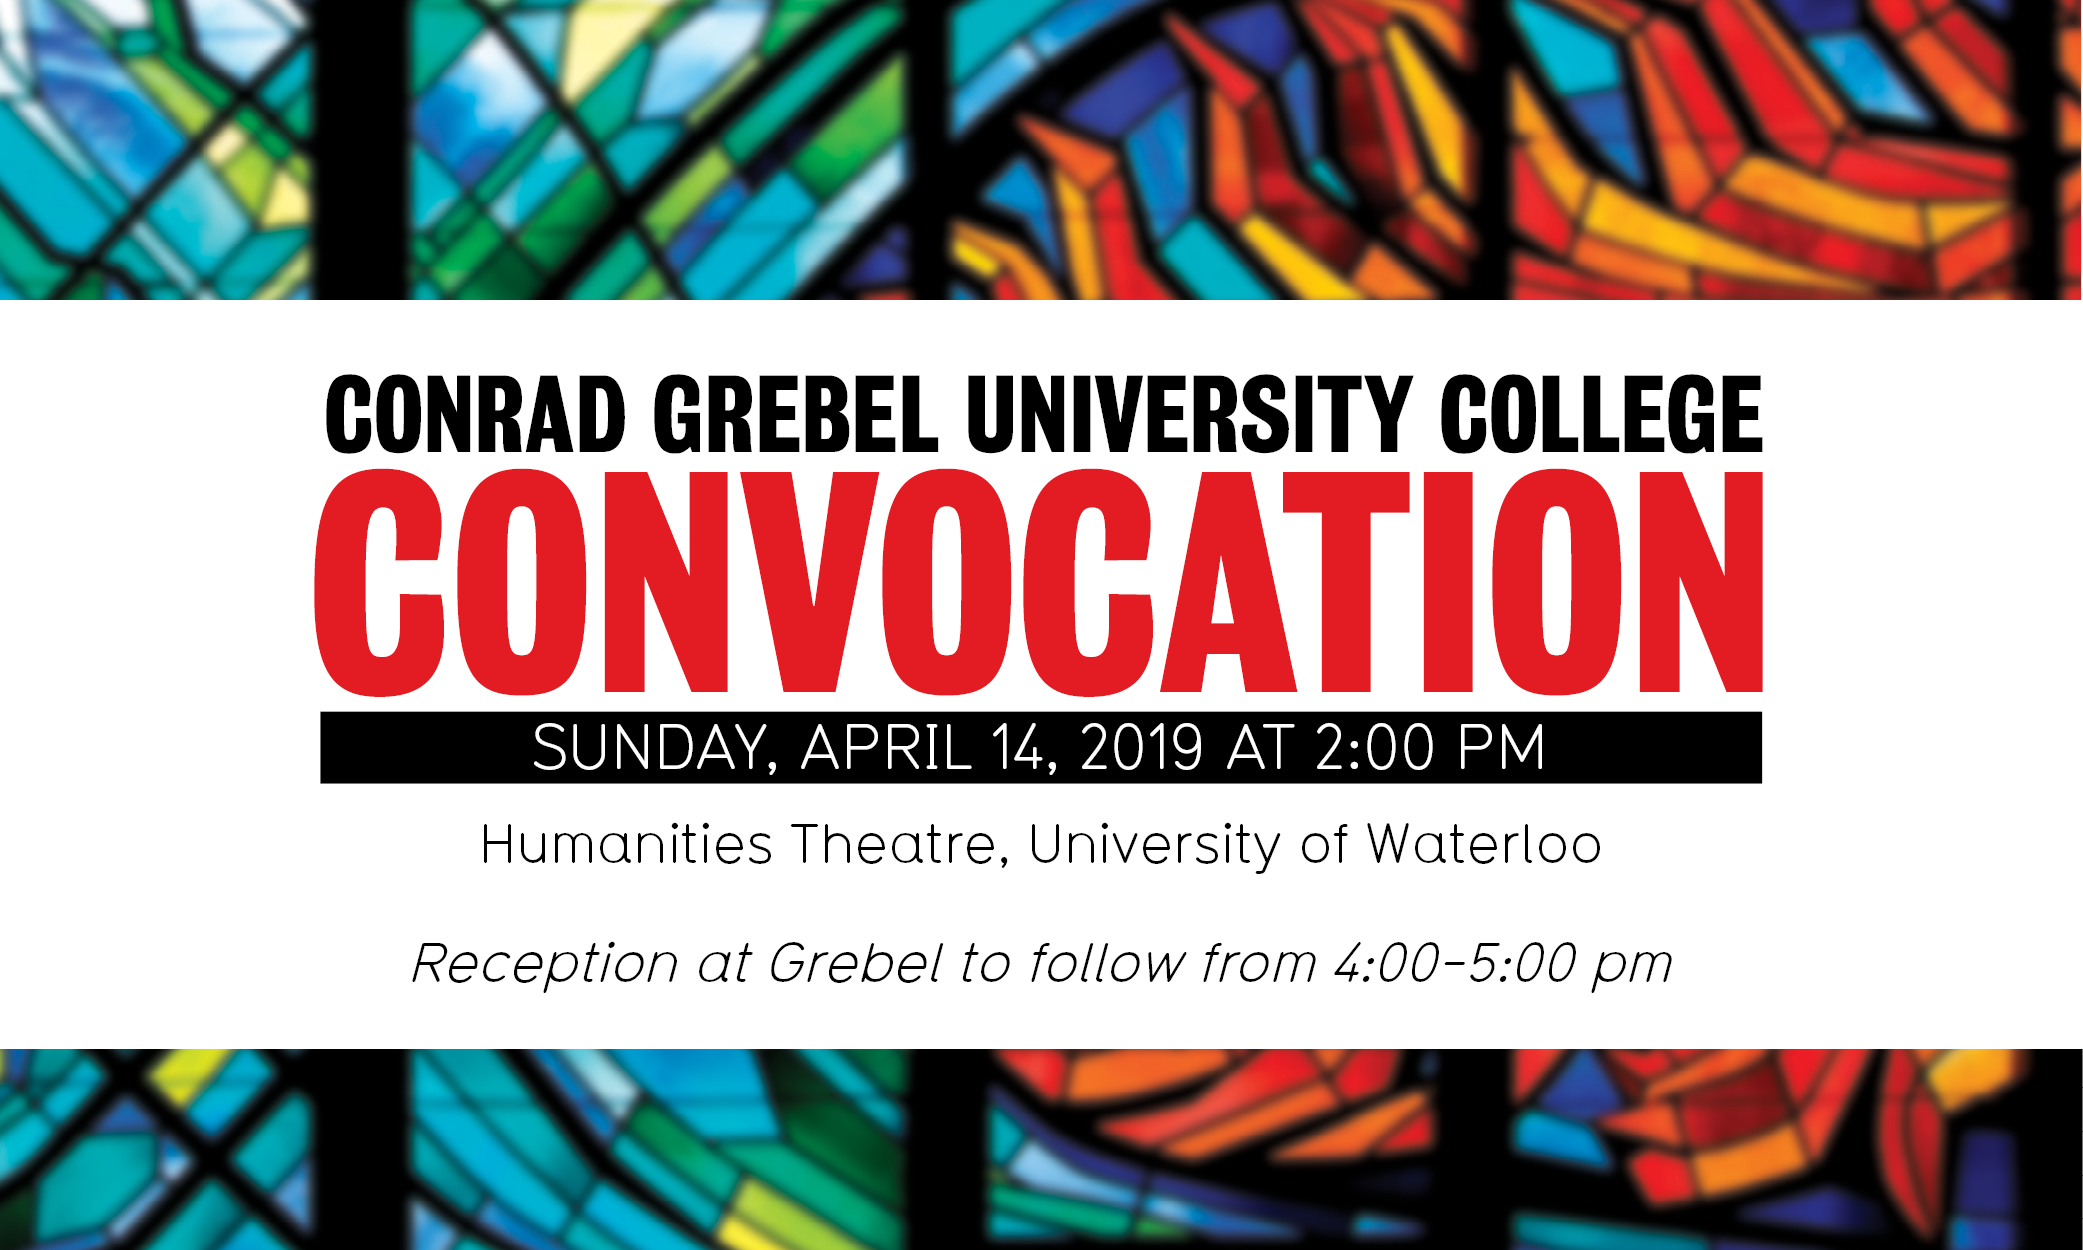 Decorative banner for convocation.